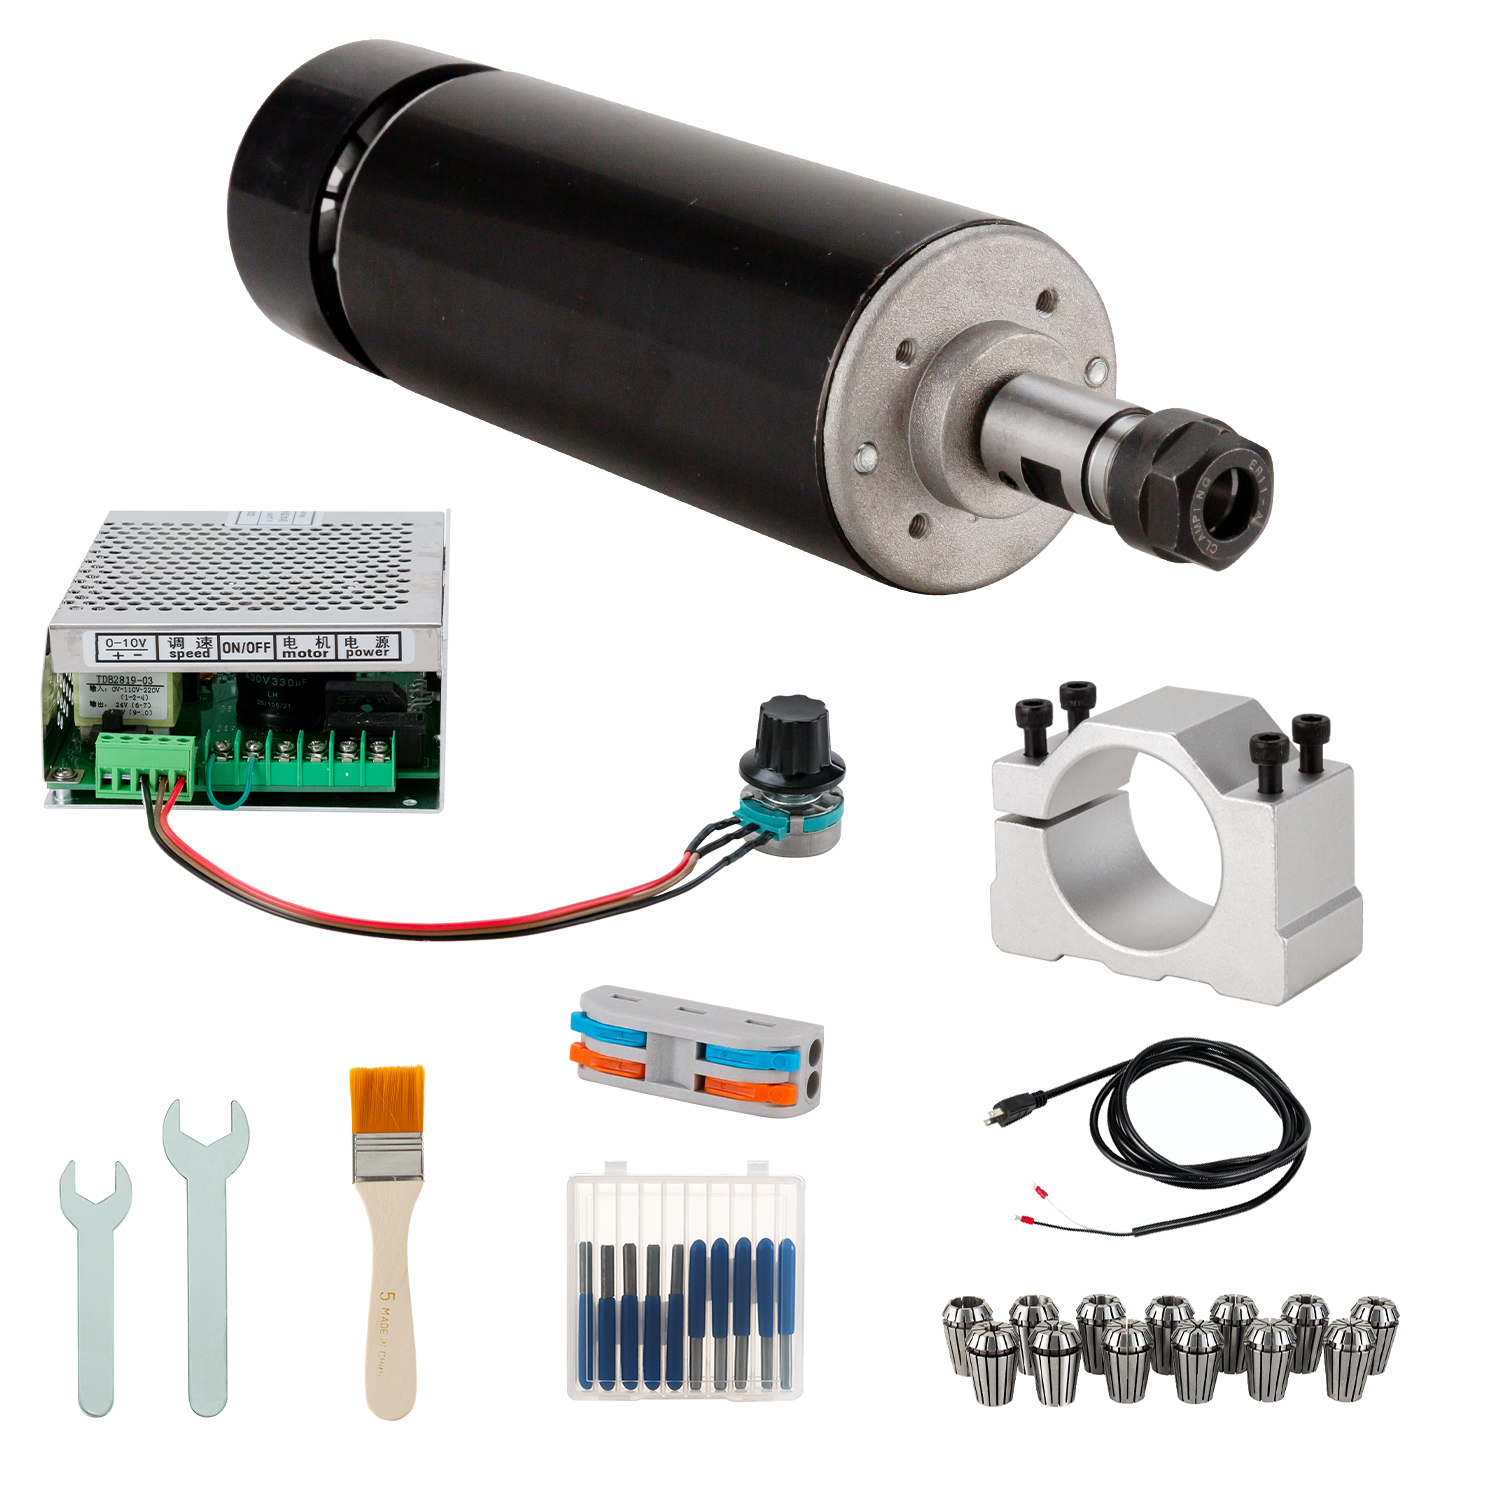 CNC 500W Spindle Motor Kit, 500W Air Cooled spindle Motor and Spindle Speed Power Converter for CNC Engraving CNC milling CNC drilling